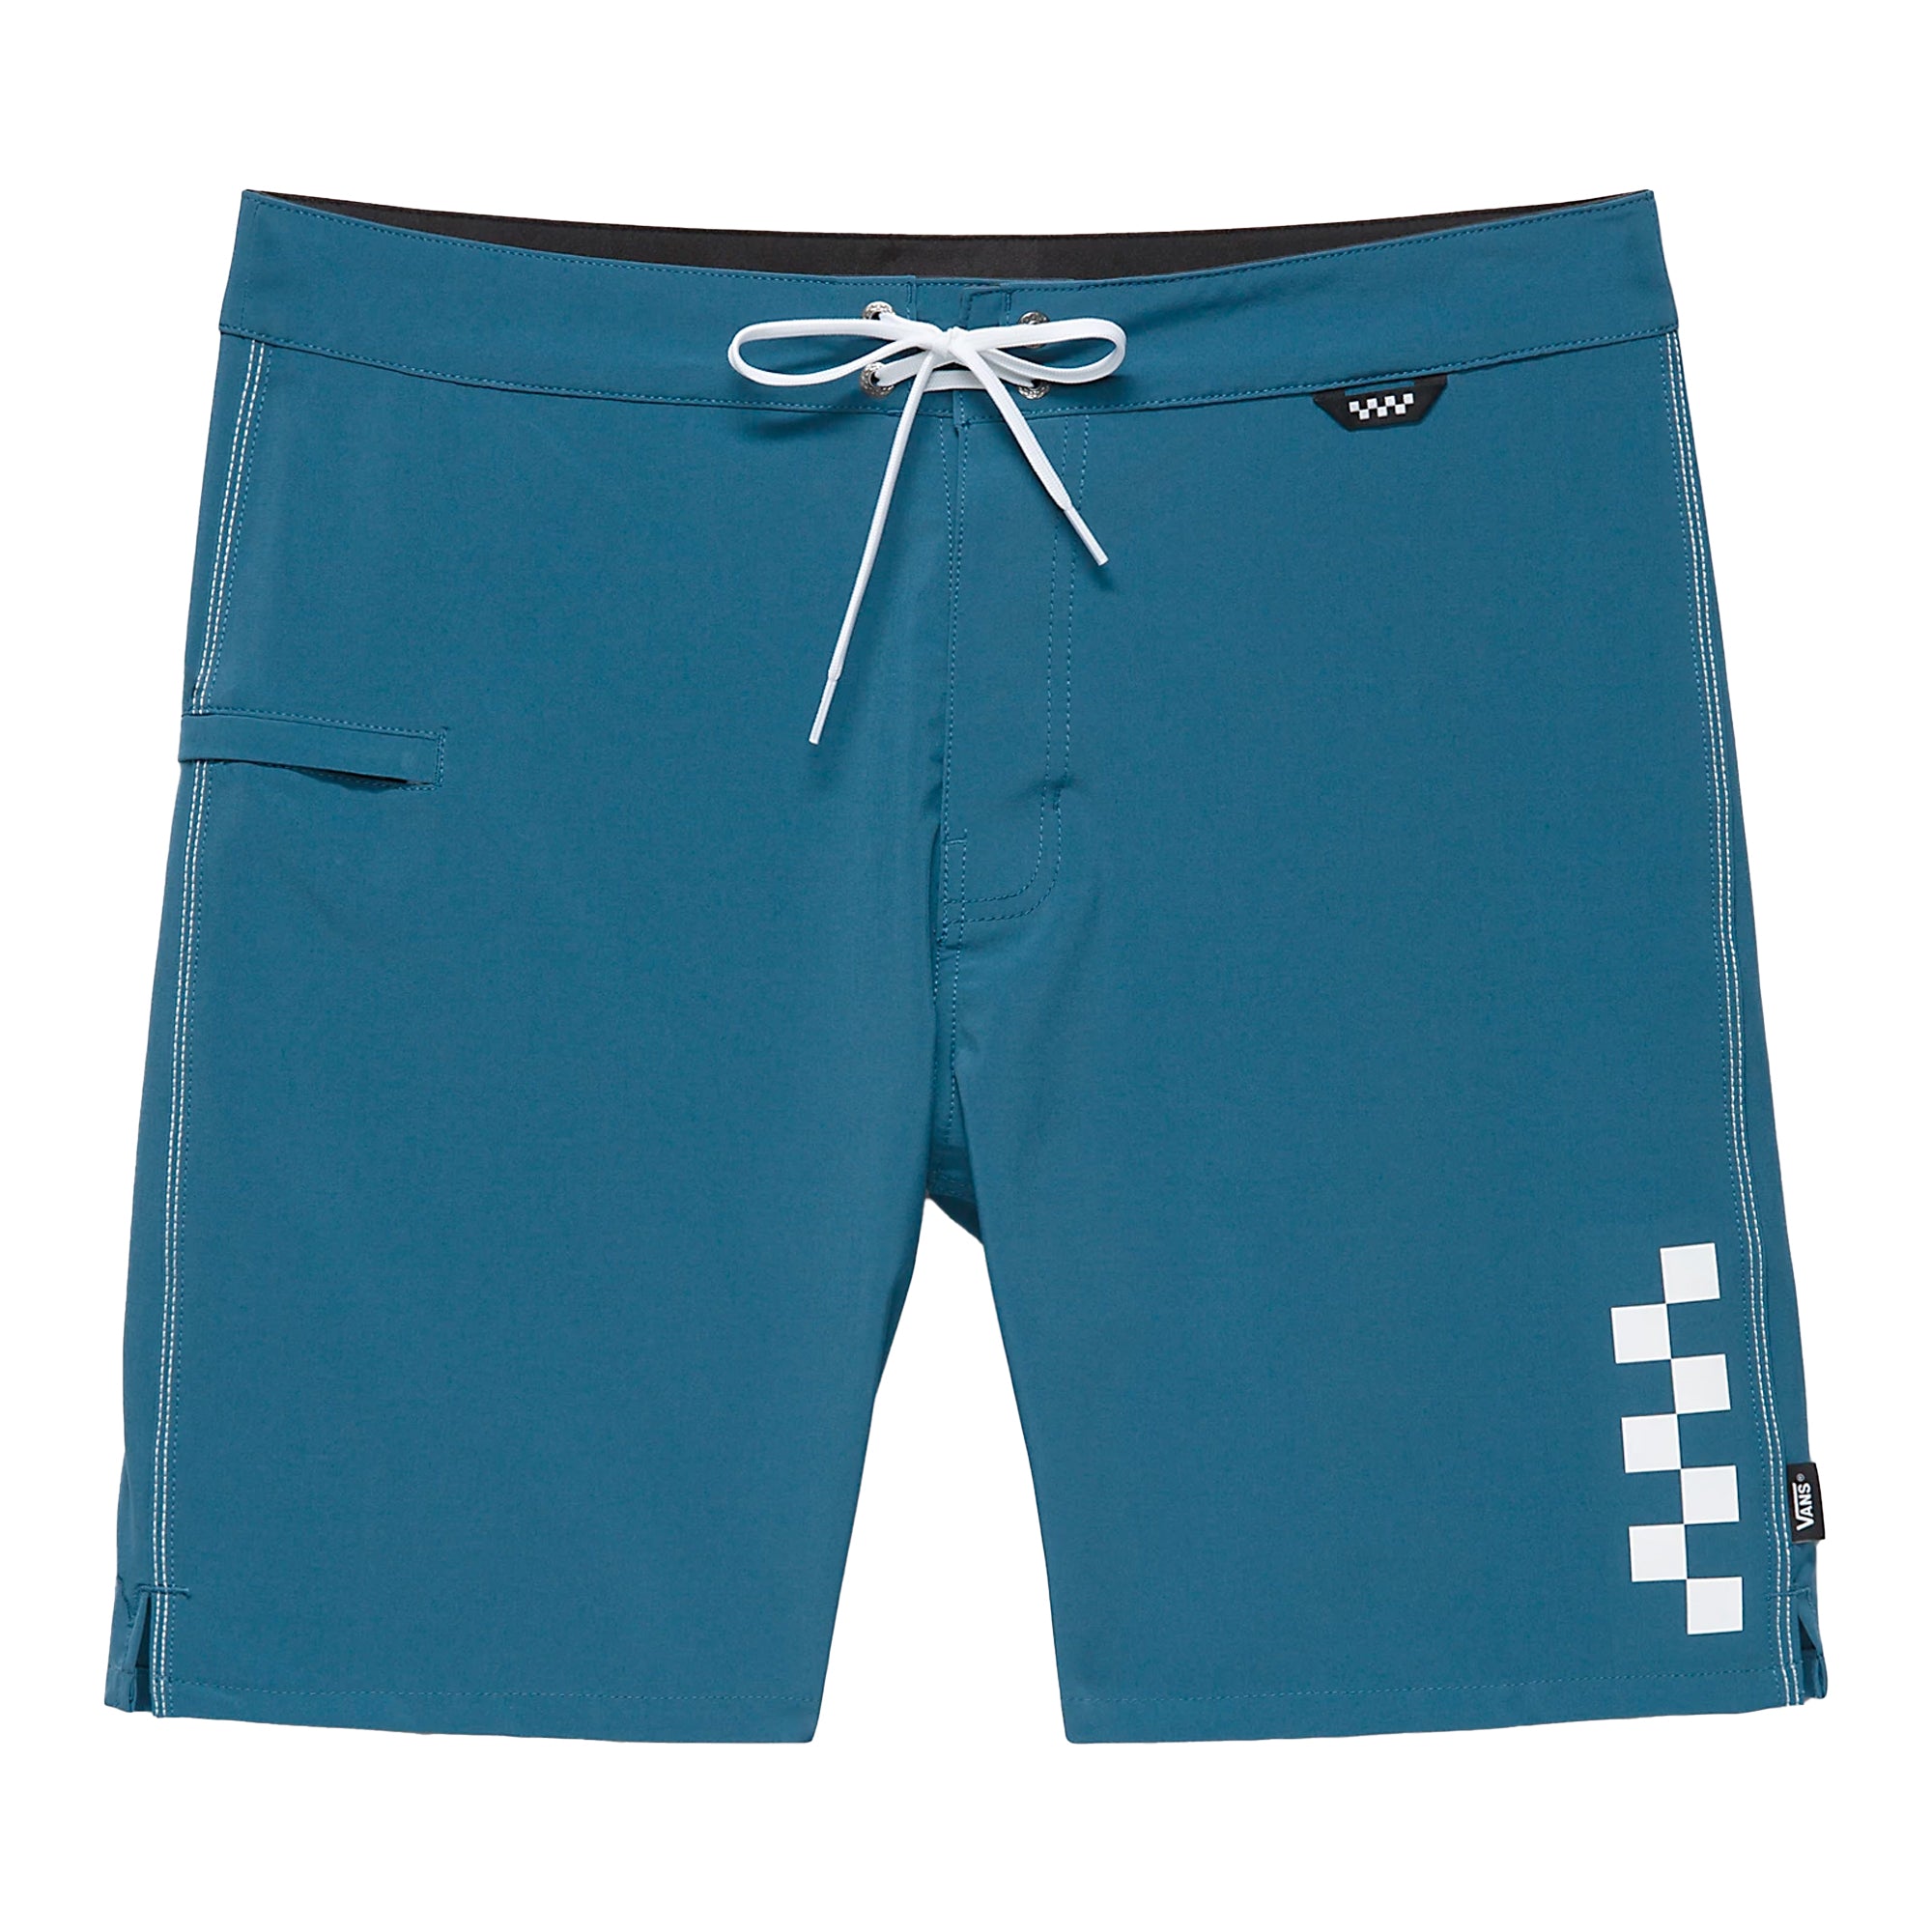 Vans The Daily Solid 18" Men's Boardshorts